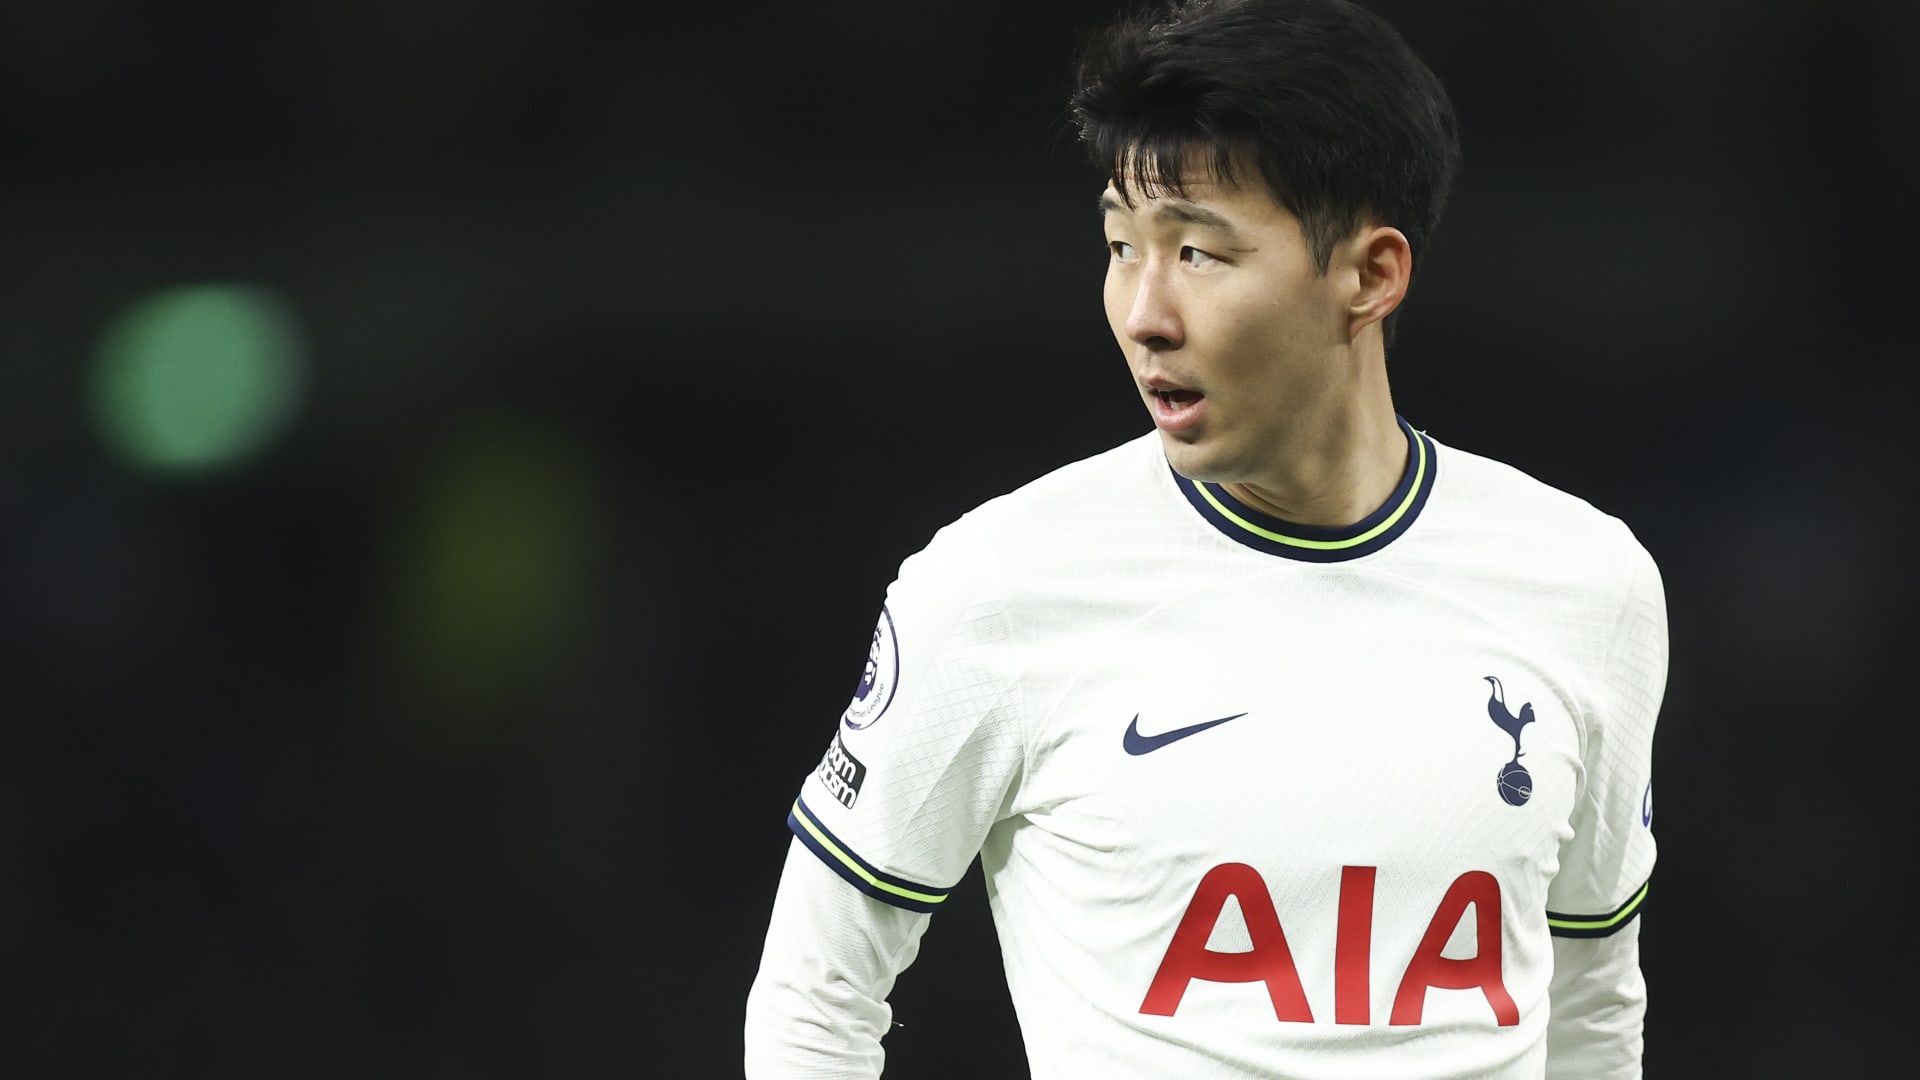 Soccer star Son Heung-min gives his top 3 tips for making it as a pro athlete